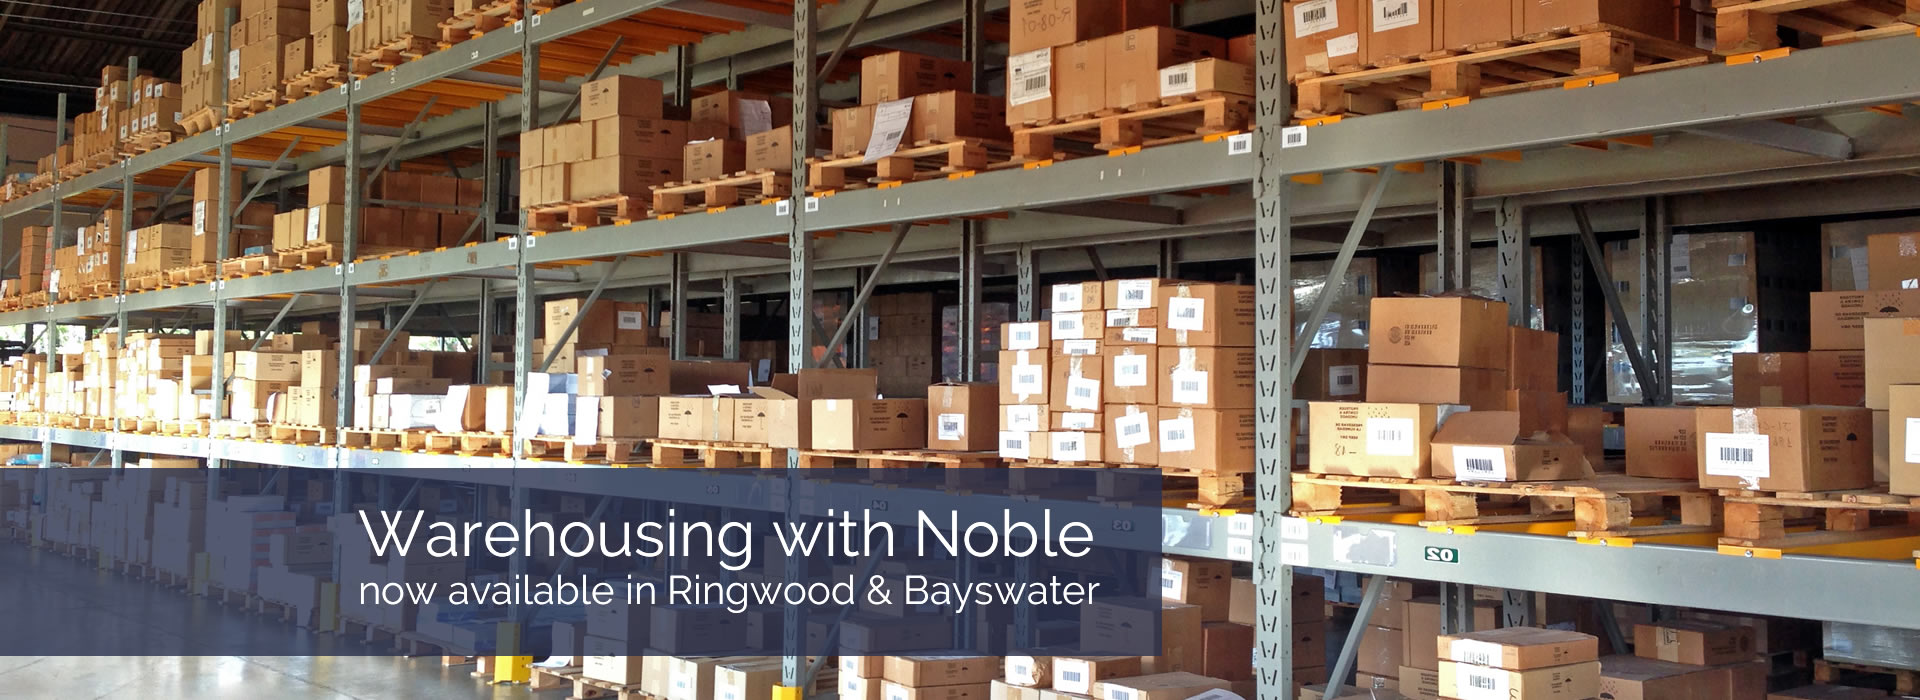 Warehousing with Noble now available in Ringwood and Bayswater